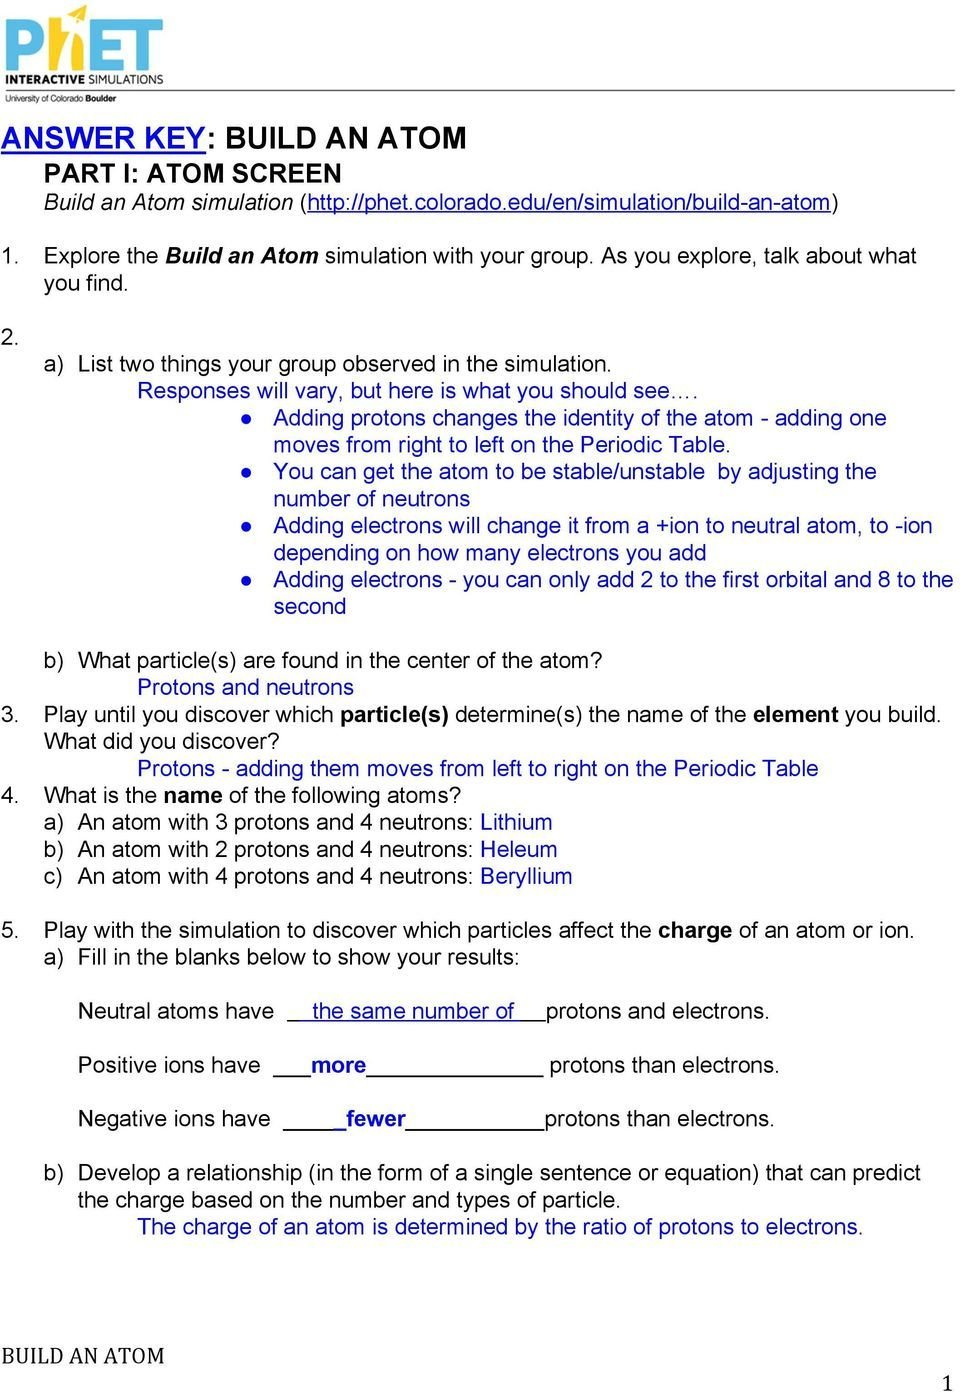 Phet Isotopes And Atomic Mass Worksheet Answers  Briefencounters Along With Isotopes And Atomic Mass Worksheet Answer Key